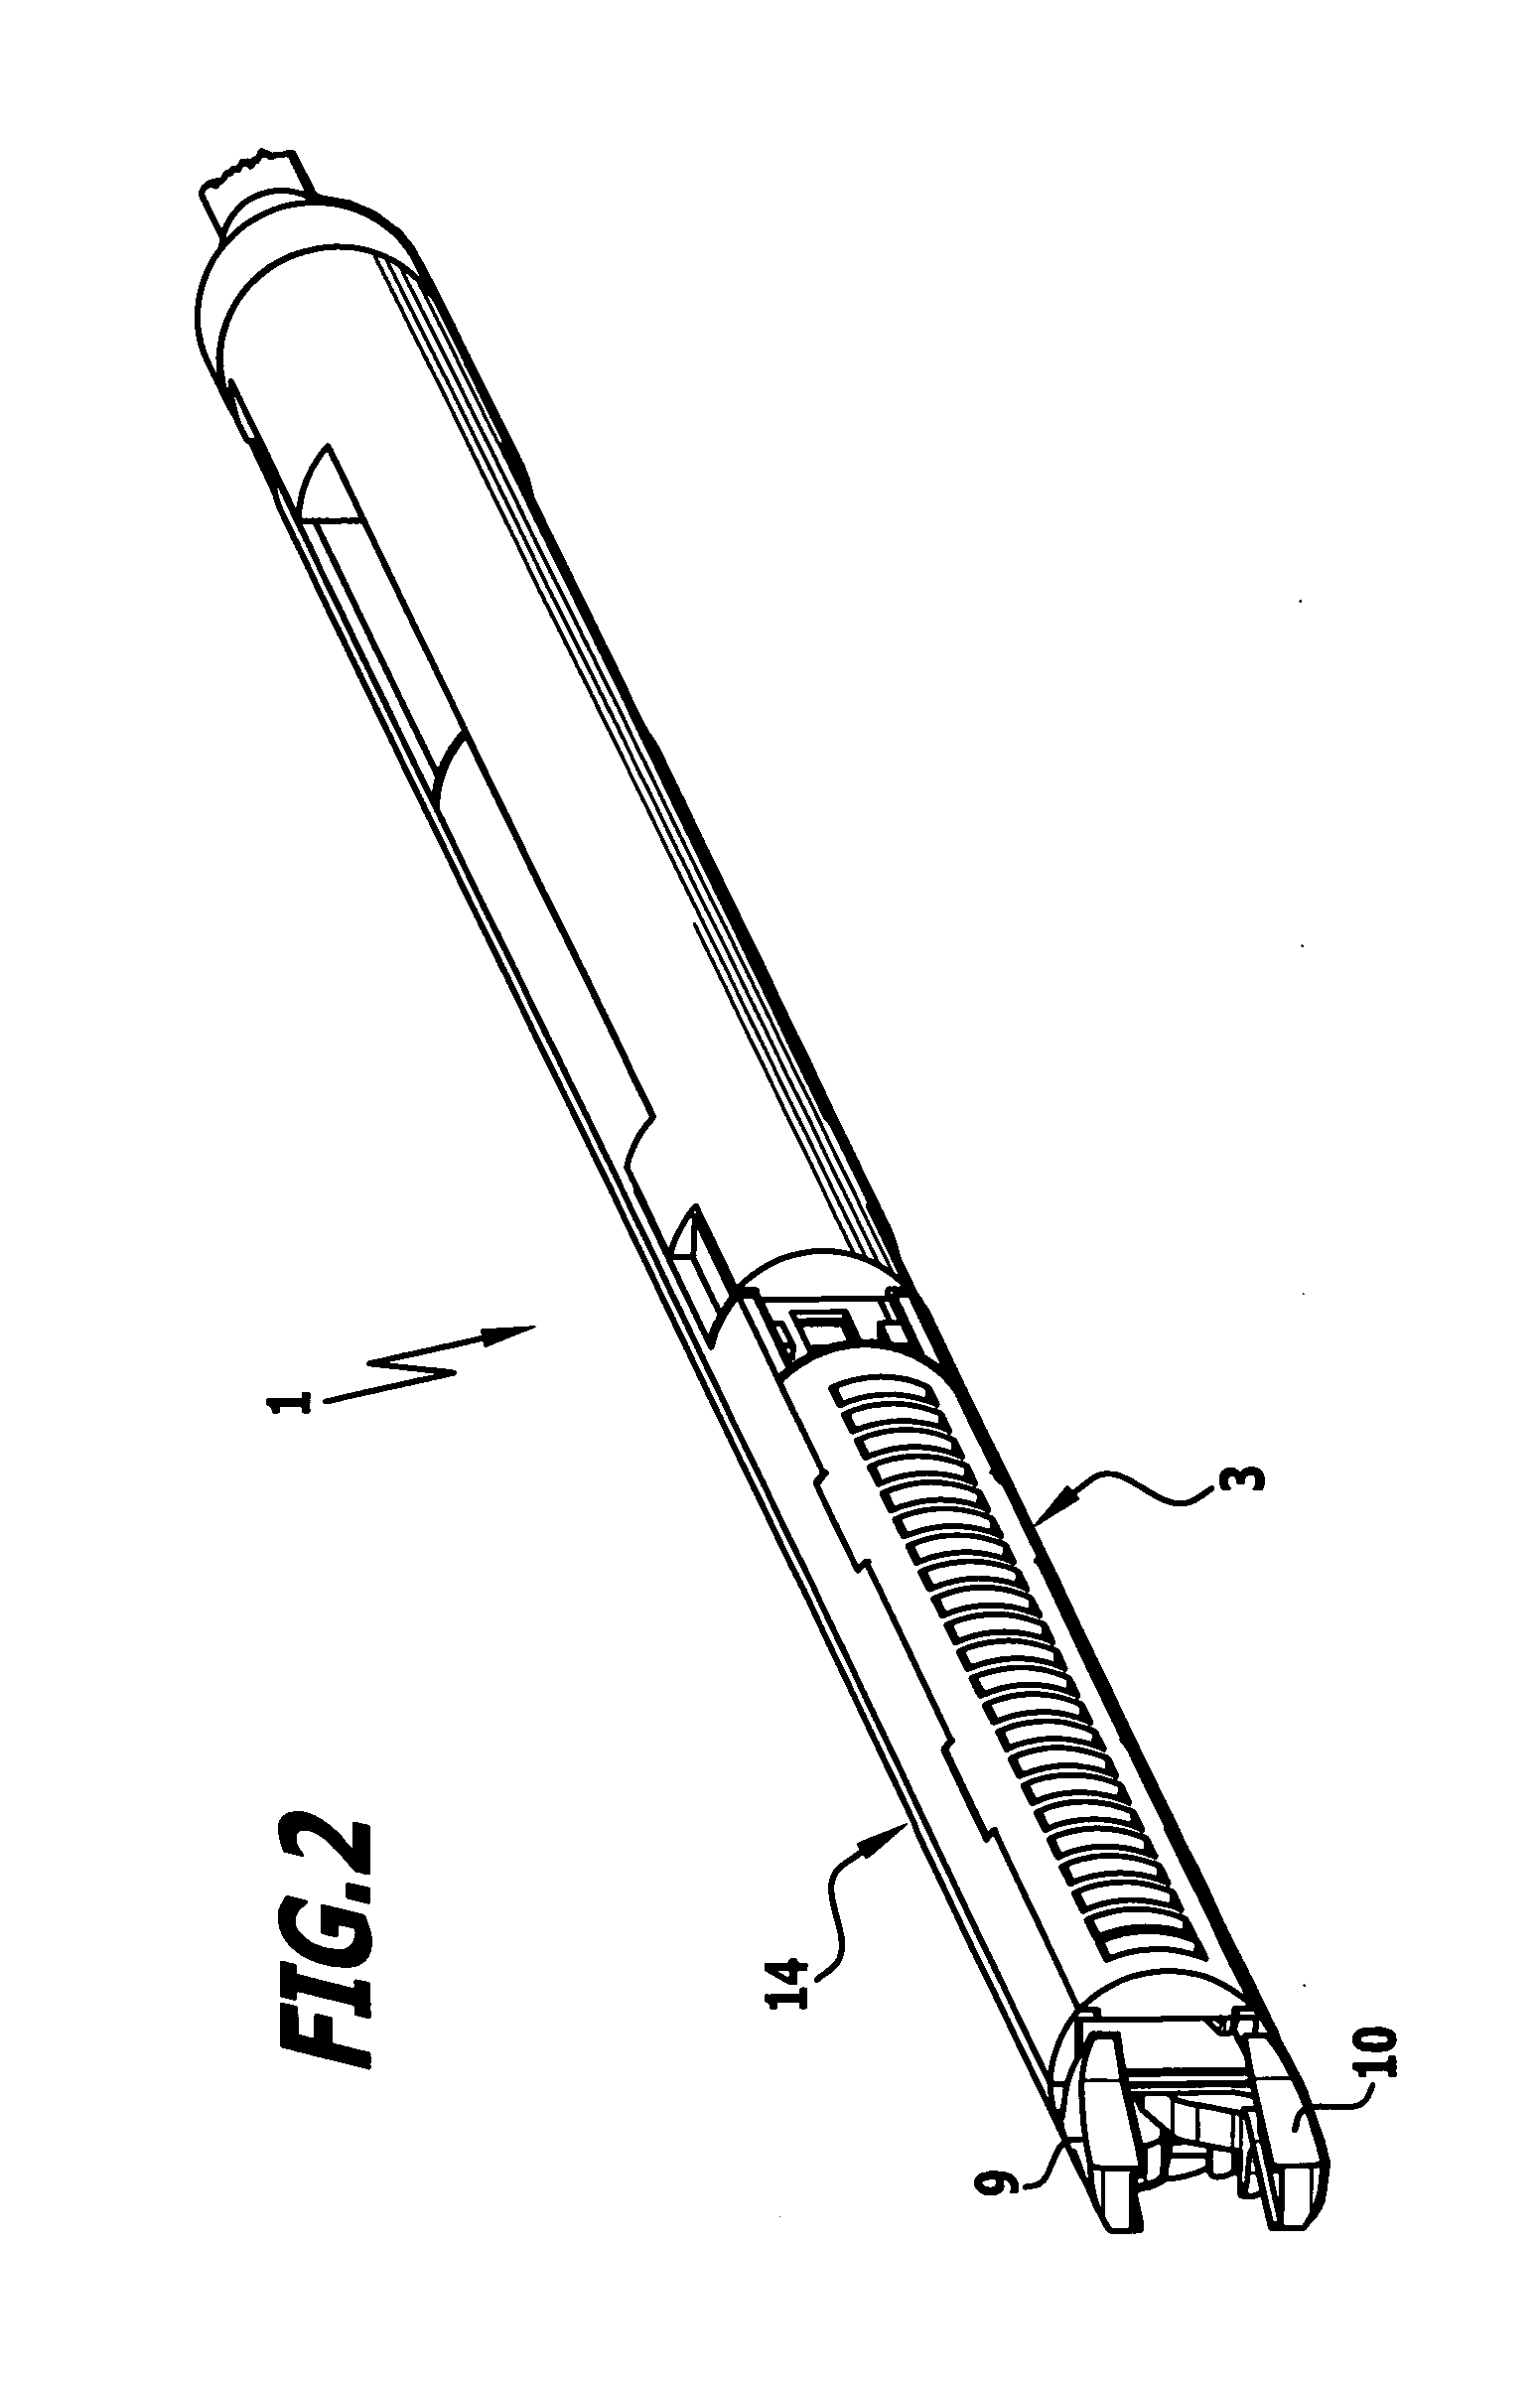 Surgical instrument for the placement of ligature clips